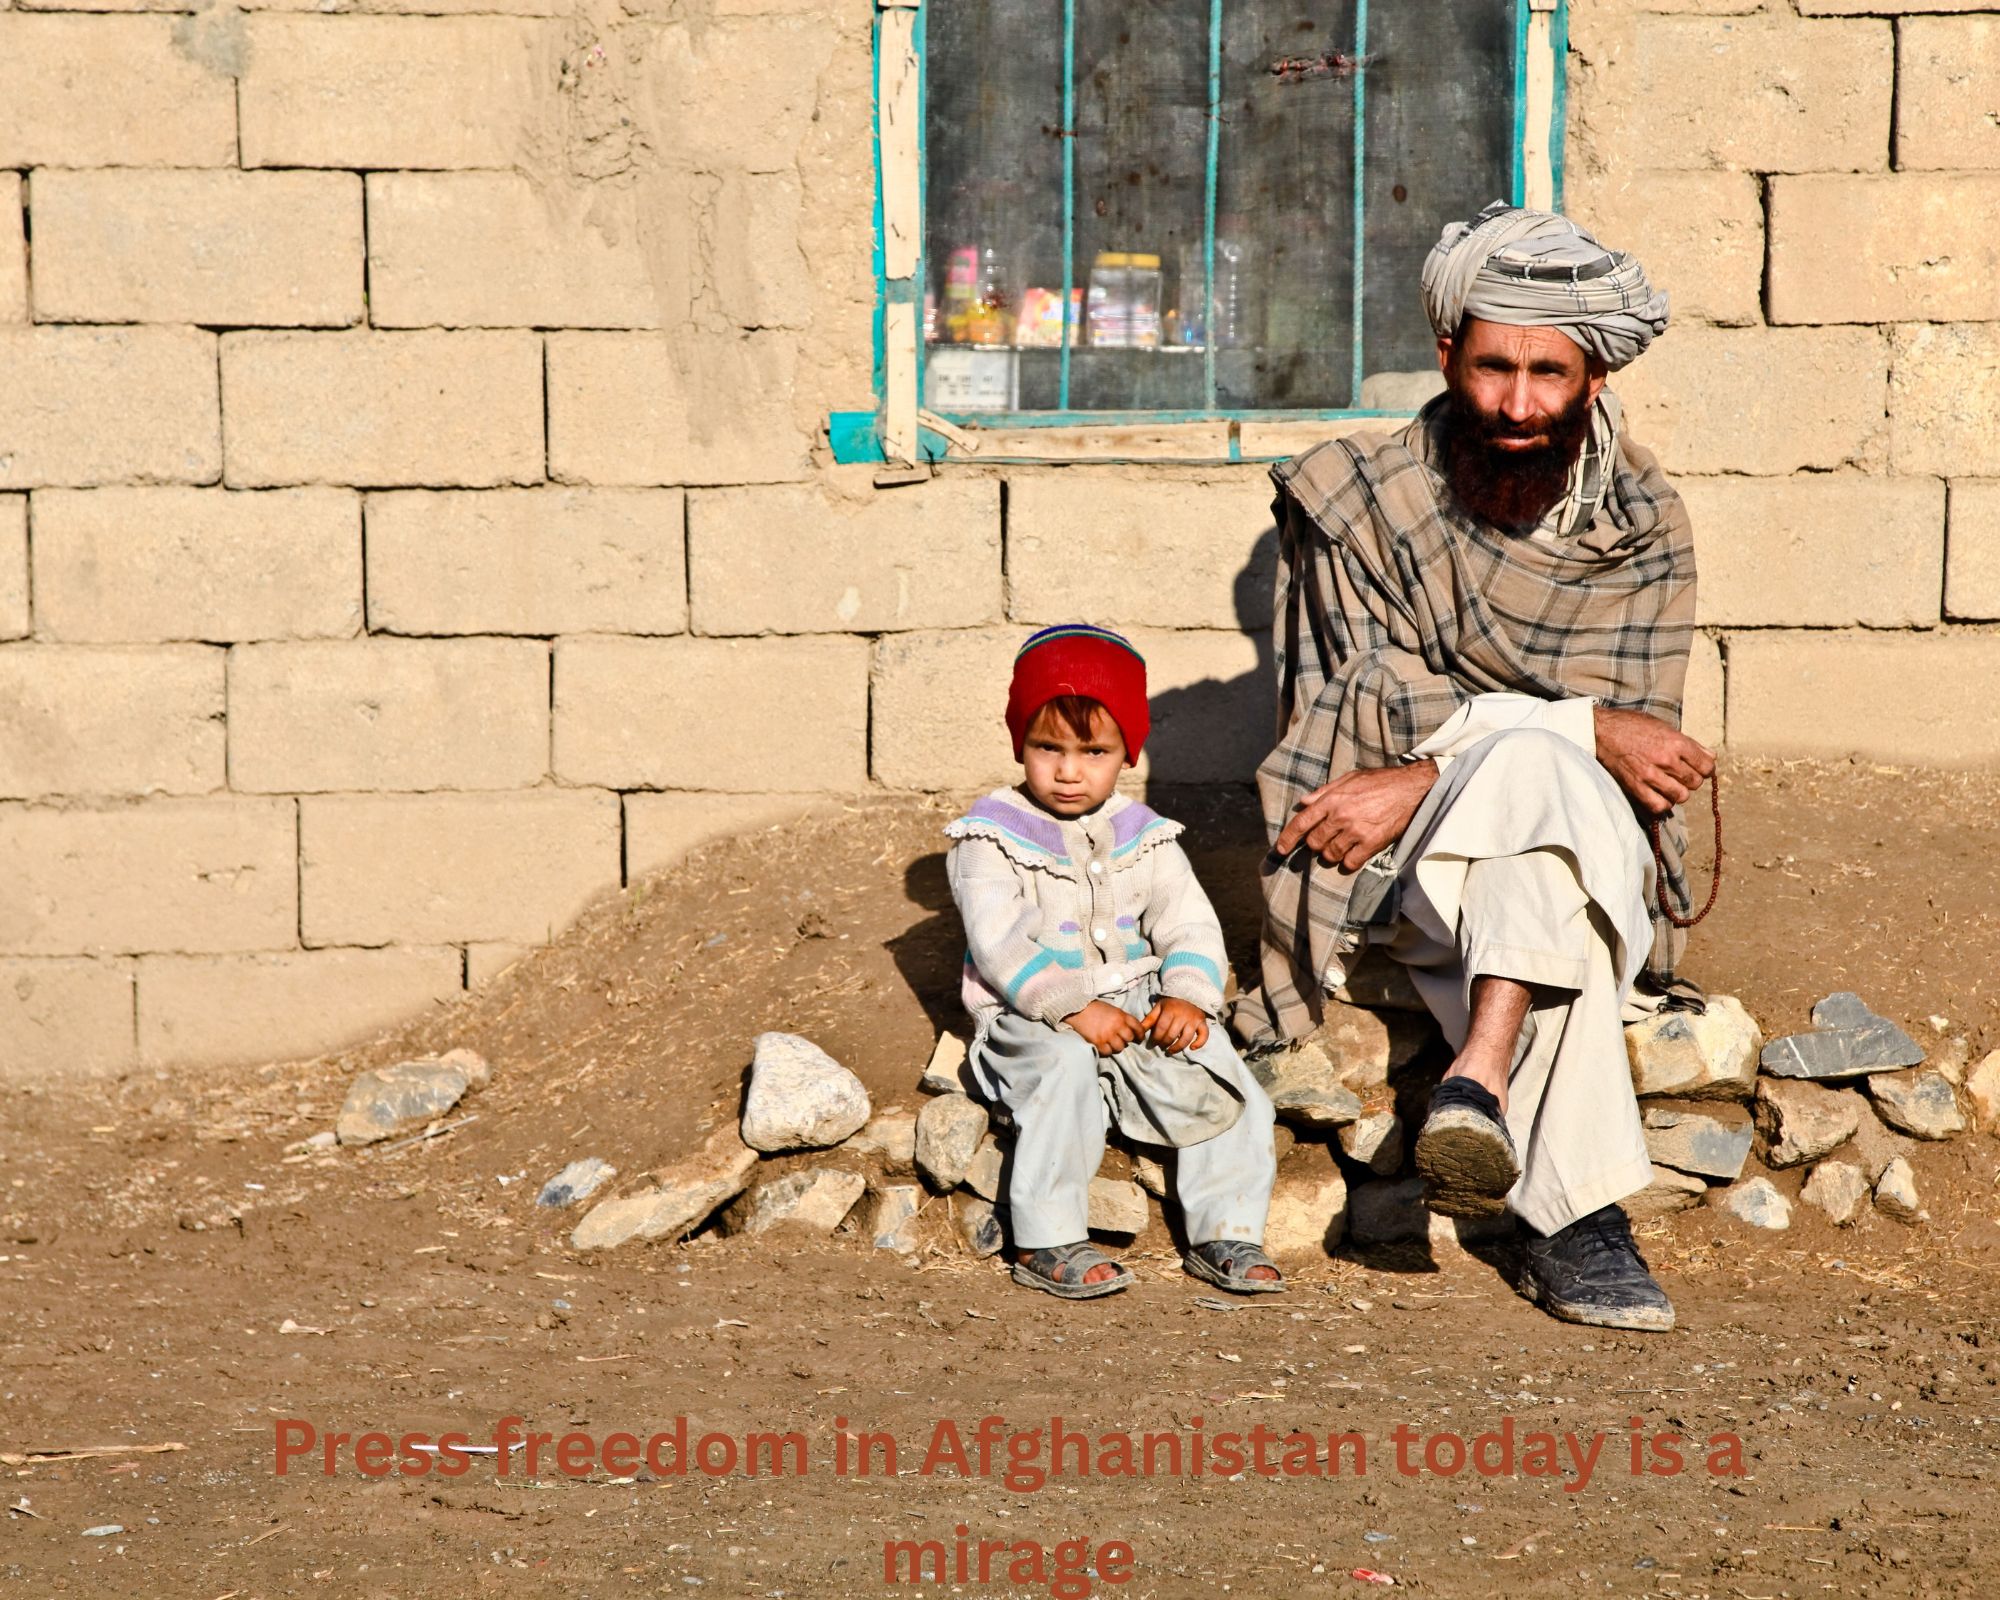 Press freedom in Afghanistan today is a mirage